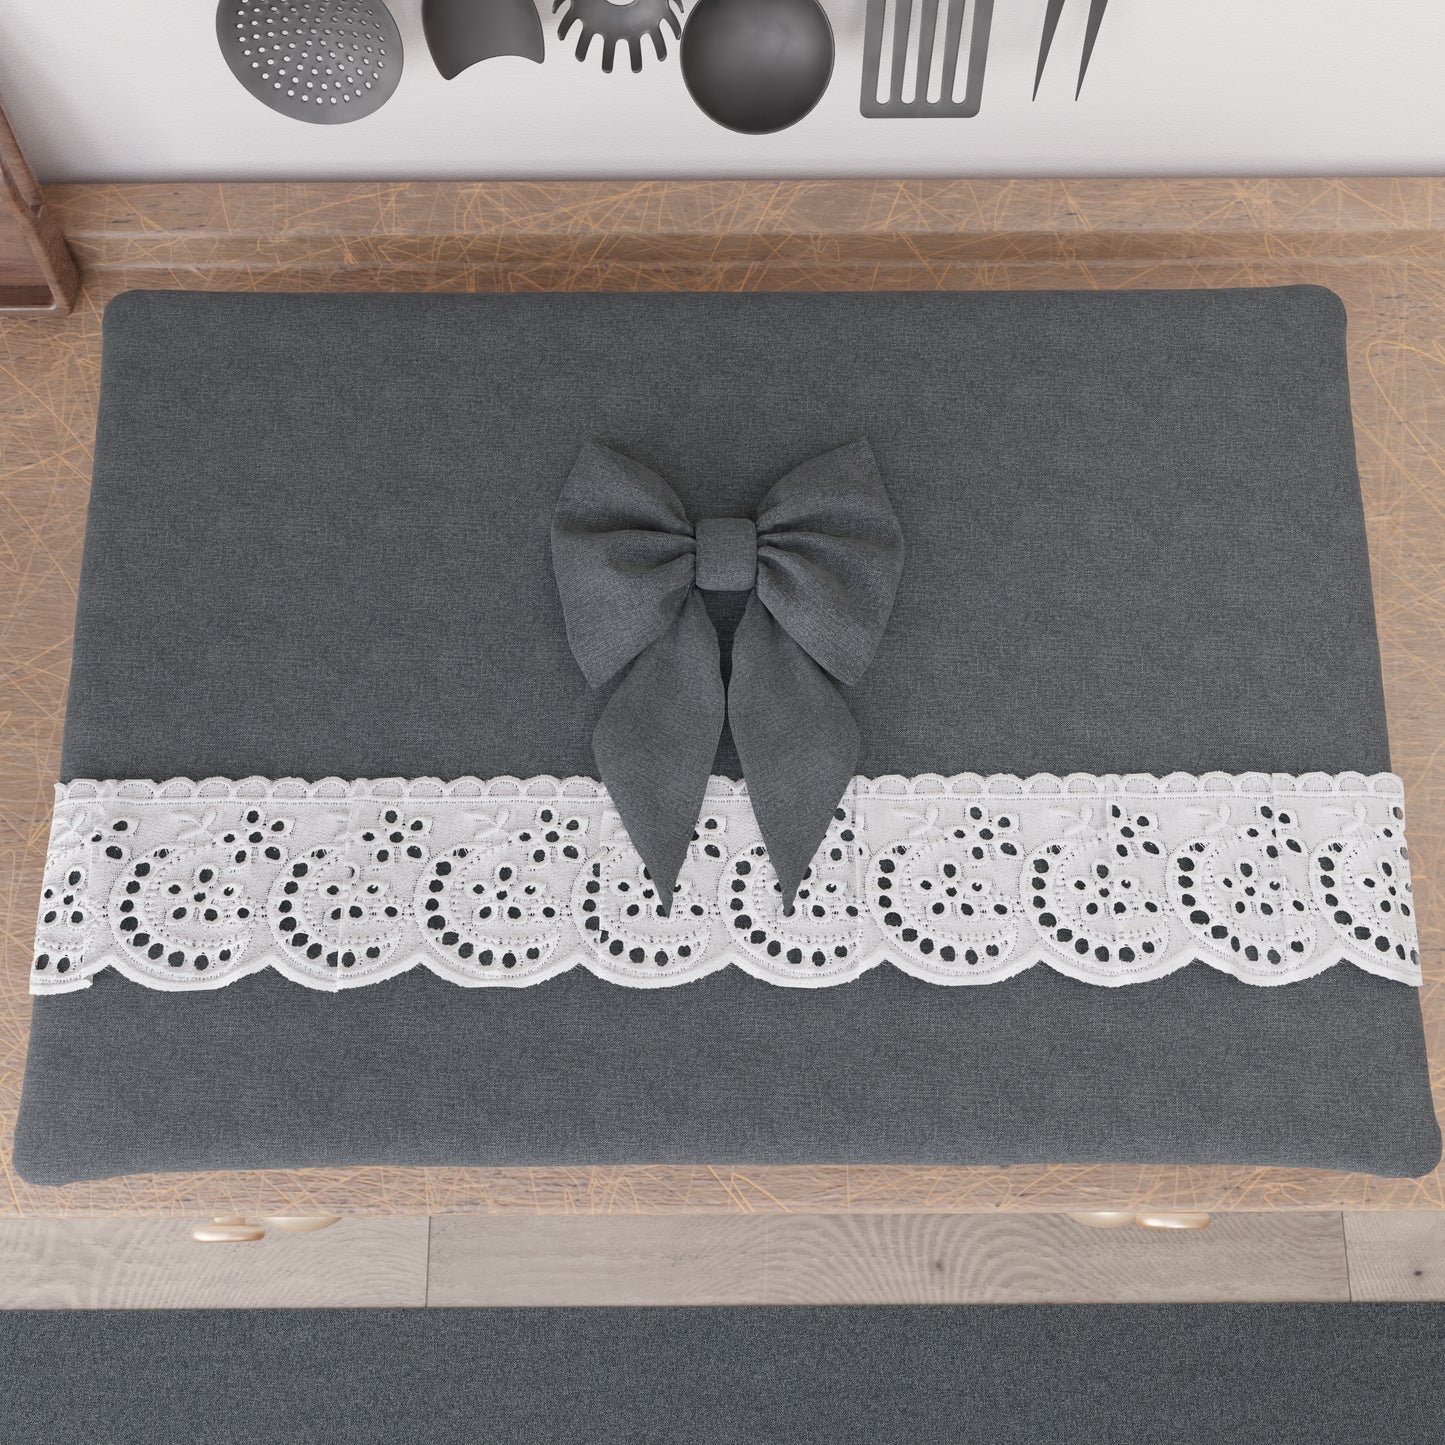 Shabby Chic Stove Cover with Lace and Dark Gray Bow 